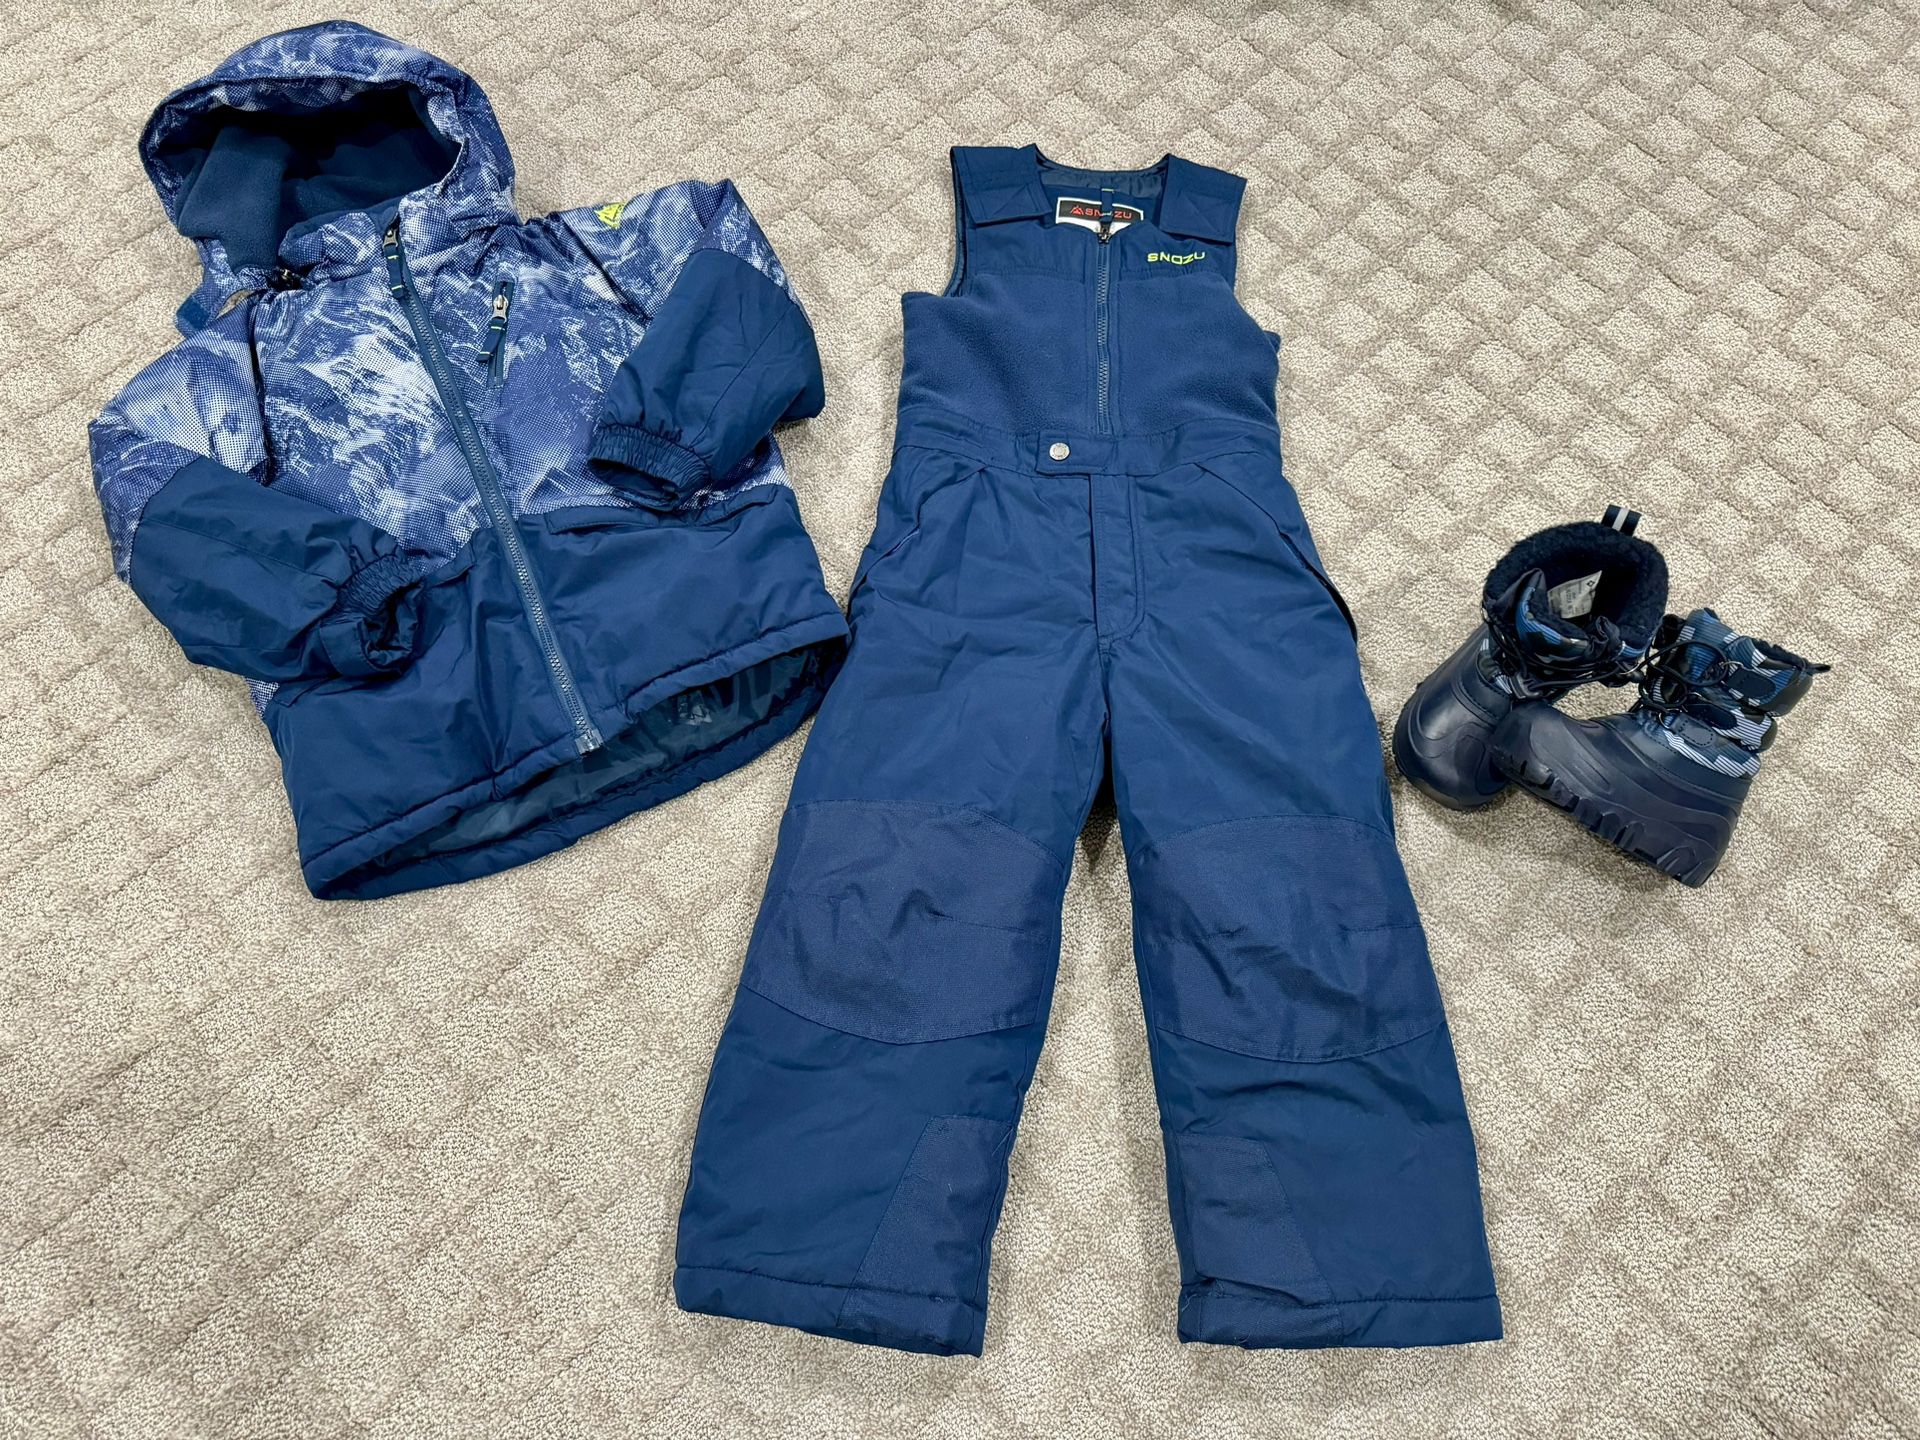 Toddler Boys Snow Suit (5T) and Snow Boots (9/10)